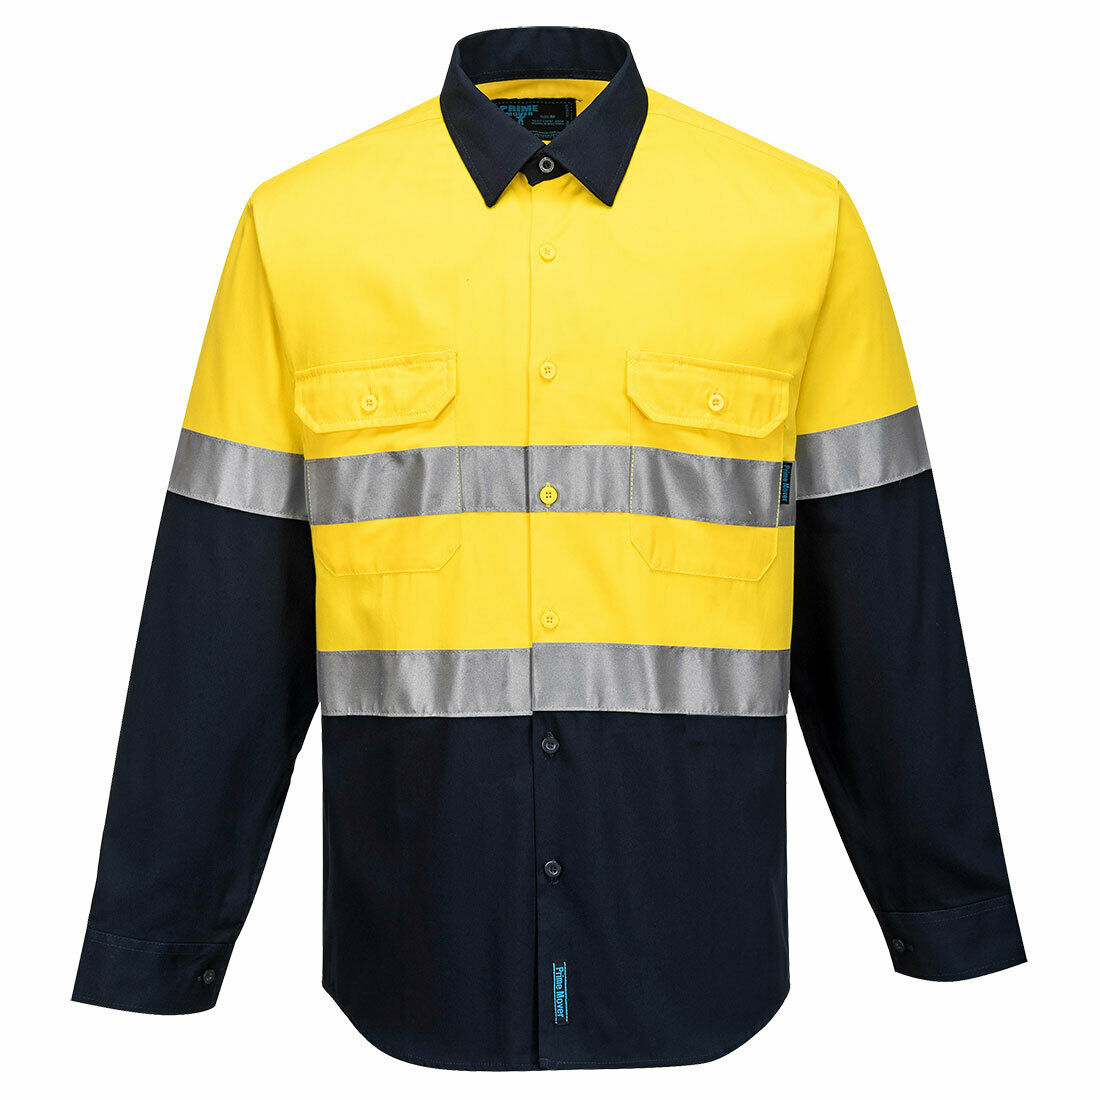 Portwest Mens Prime Mover Work Hi-Vis Two Tone Long Sleeve Shirt Taped MA101